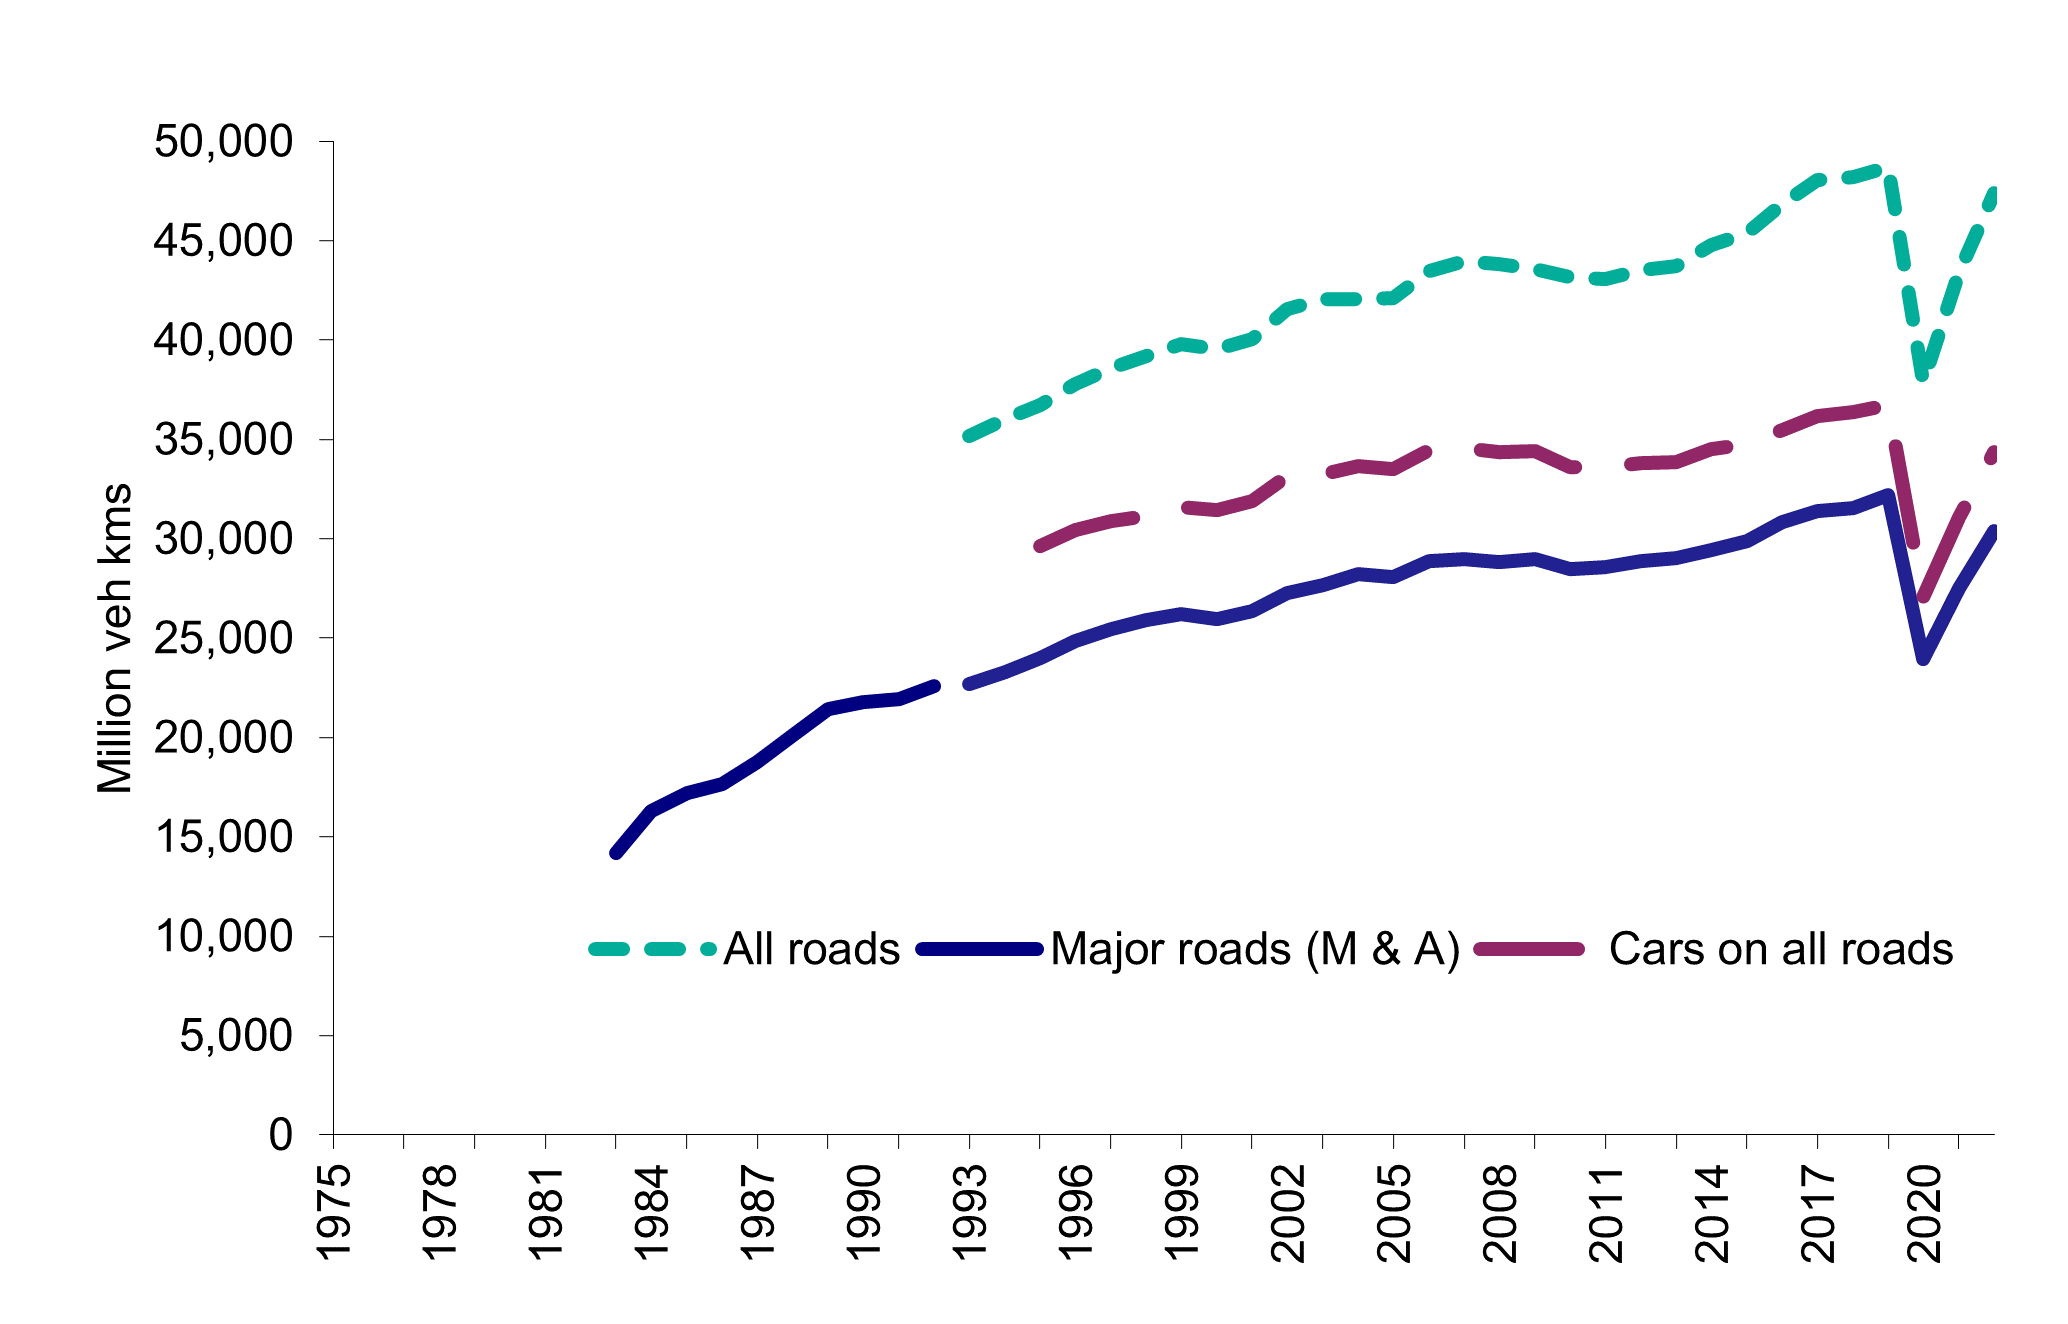 Figure 2: Traffic in Scotland (vehicle km), as described in text above